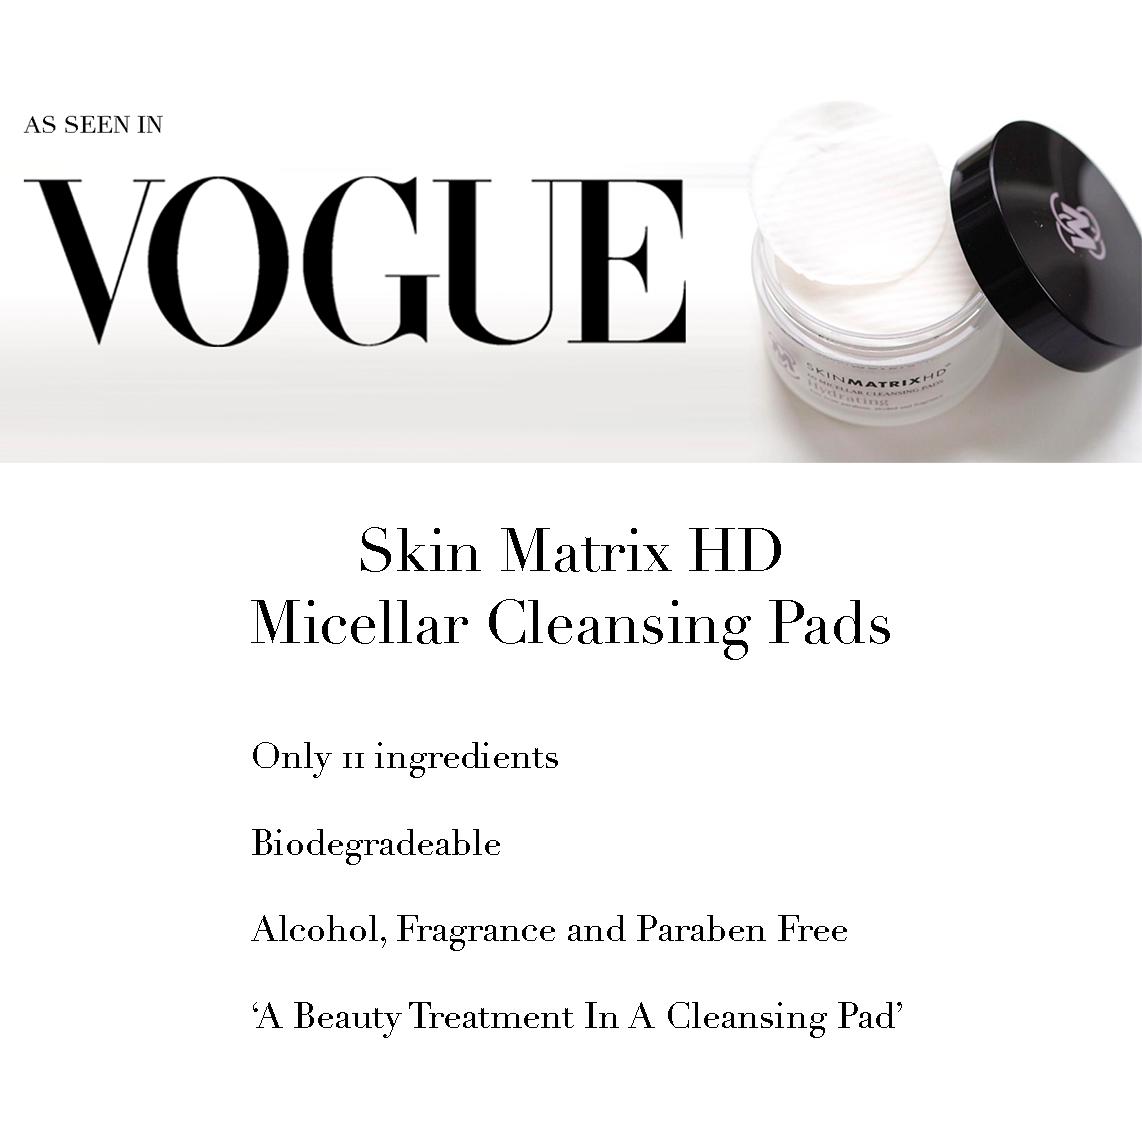 The purest and most refreshing cleanse you’ll ever experience as recommended in VOGUE 💫
#biodegradablebeauty #skincareuk #skincare #micellarpads #micellar #vogue #feature #topproduct #newproduct #skinmatrixhd #beauty #skin #face #cleanse #pure #paraben #alcohol #fragrance #love